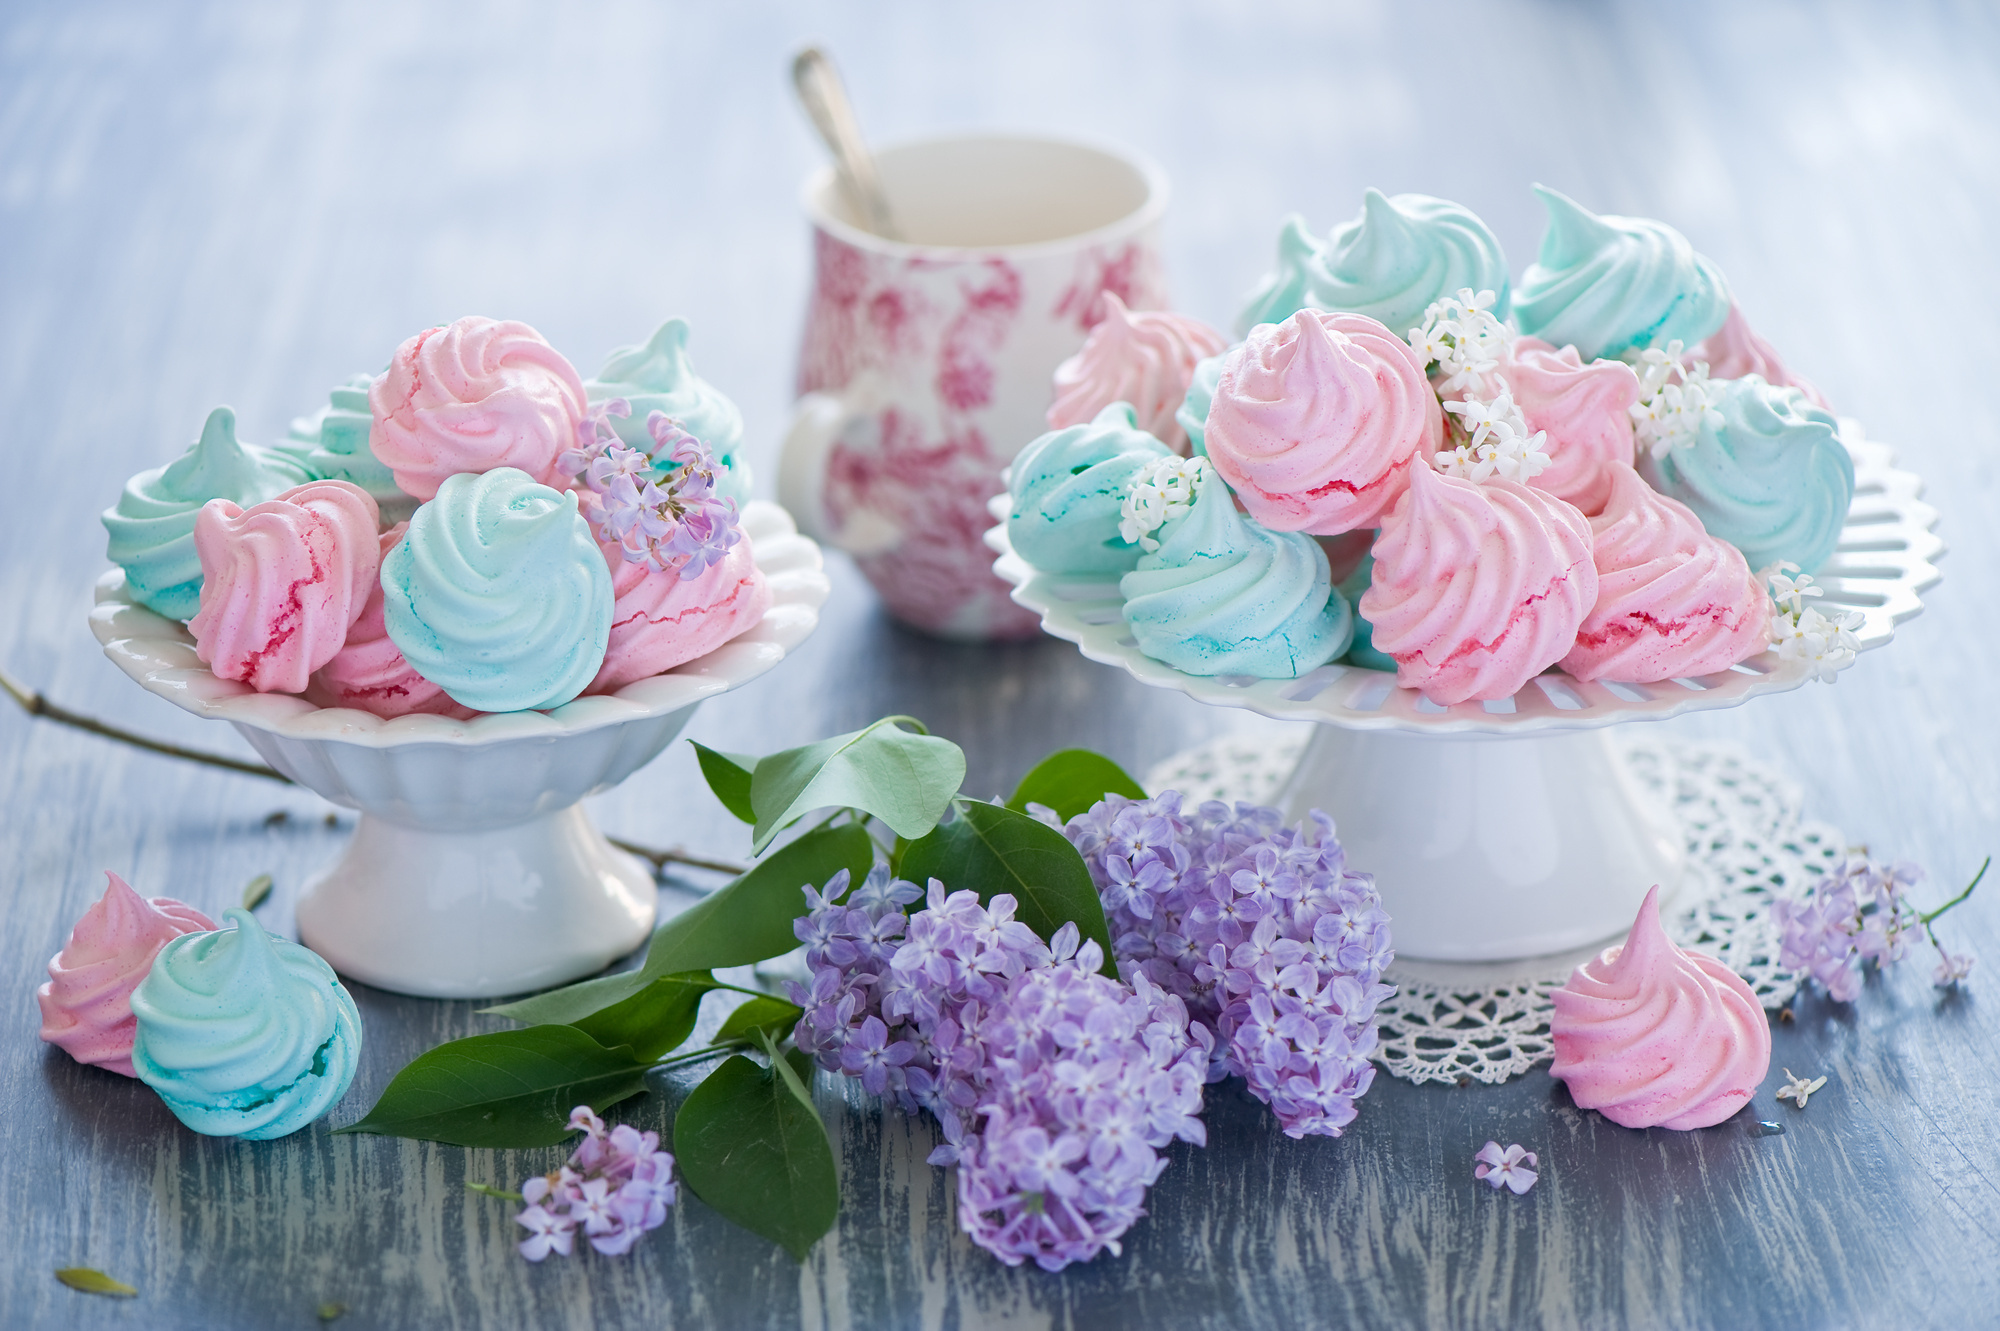 Meringue: A familiar topping for pastries and sweet goods. 2000x1340 HD Wallpaper.